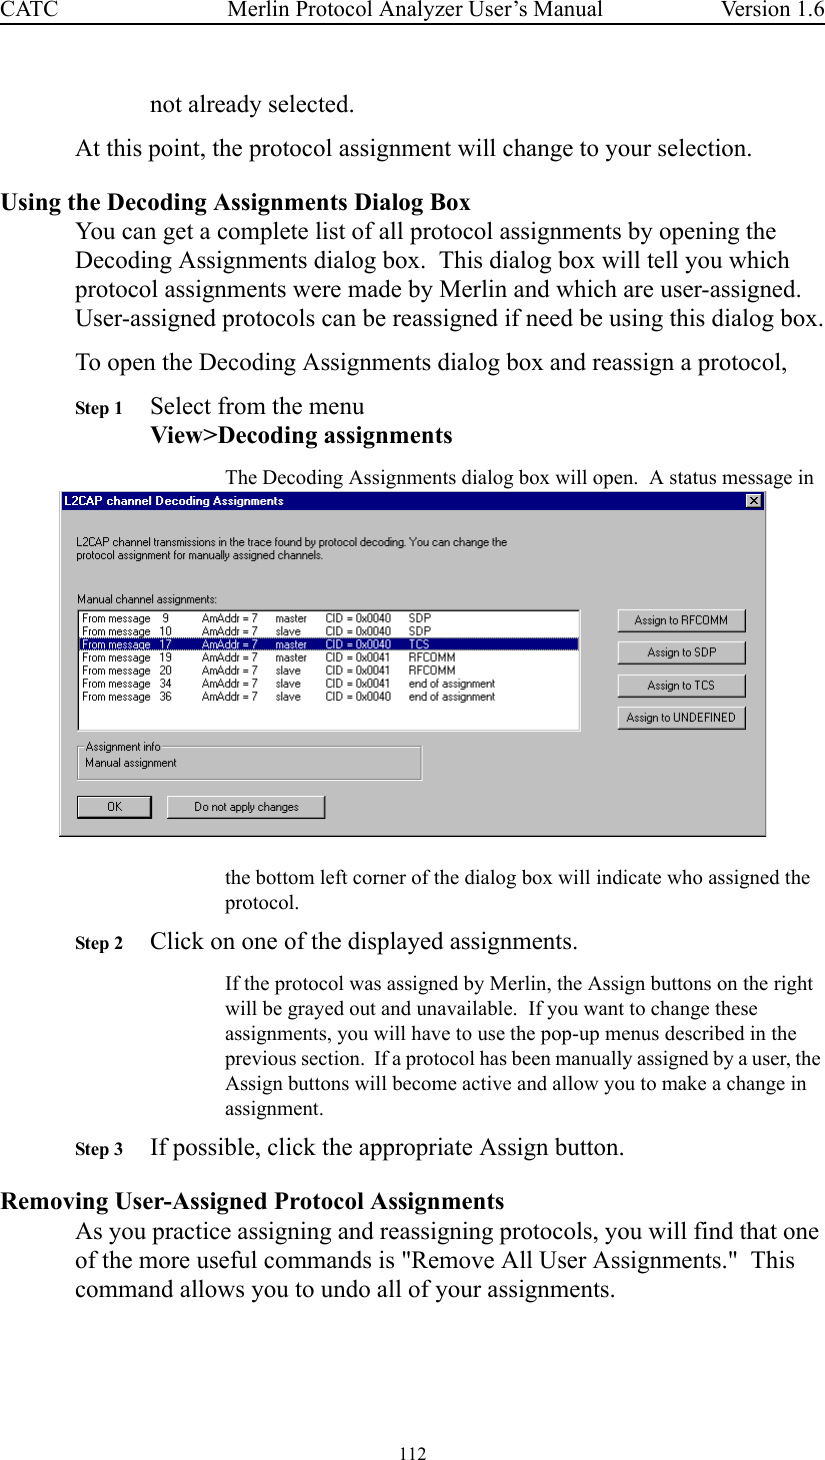 112 Merlin Protocol Analyzer User’s ManualCATC Version 1.6not already selected.  At this point, the protocol assignment will change to your selection.Using the Decoding Assignments Dialog BoxYou can get a complete list of all protocol assignments by opening the Decoding Assignments dialog box.  This dialog box will tell you which protocol assignments were made by Merlin and which are user-assigned.  User-assigned protocols can be reassigned if need be using this dialog box.To open the Decoding Assignments dialog box and reassign a protocol, Step 1 Select from the menuView&gt;Decoding assignmentsThe Decoding Assignments dialog box will open.  A status message in the bottom left corner of the dialog box will indicate who assigned the protocol.  Step 2 Click on one of the displayed assignments.If the protocol was assigned by Merlin, the Assign buttons on the right will be grayed out and unavailable.  If you want to change these assignments, you will have to use the pop-up menus described in the previous section.  If a protocol has been manually assigned by a user, the Assign buttons will become active and allow you to make a change in assignment.Step 3 If possible, click the appropriate Assign button.Removing User-Assigned Protocol AssignmentsAs you practice assigning and reassigning protocols, you will find that one of the more useful commands is &quot;Remove All User Assignments.&quot;  This command allows you to undo all of your assignments.